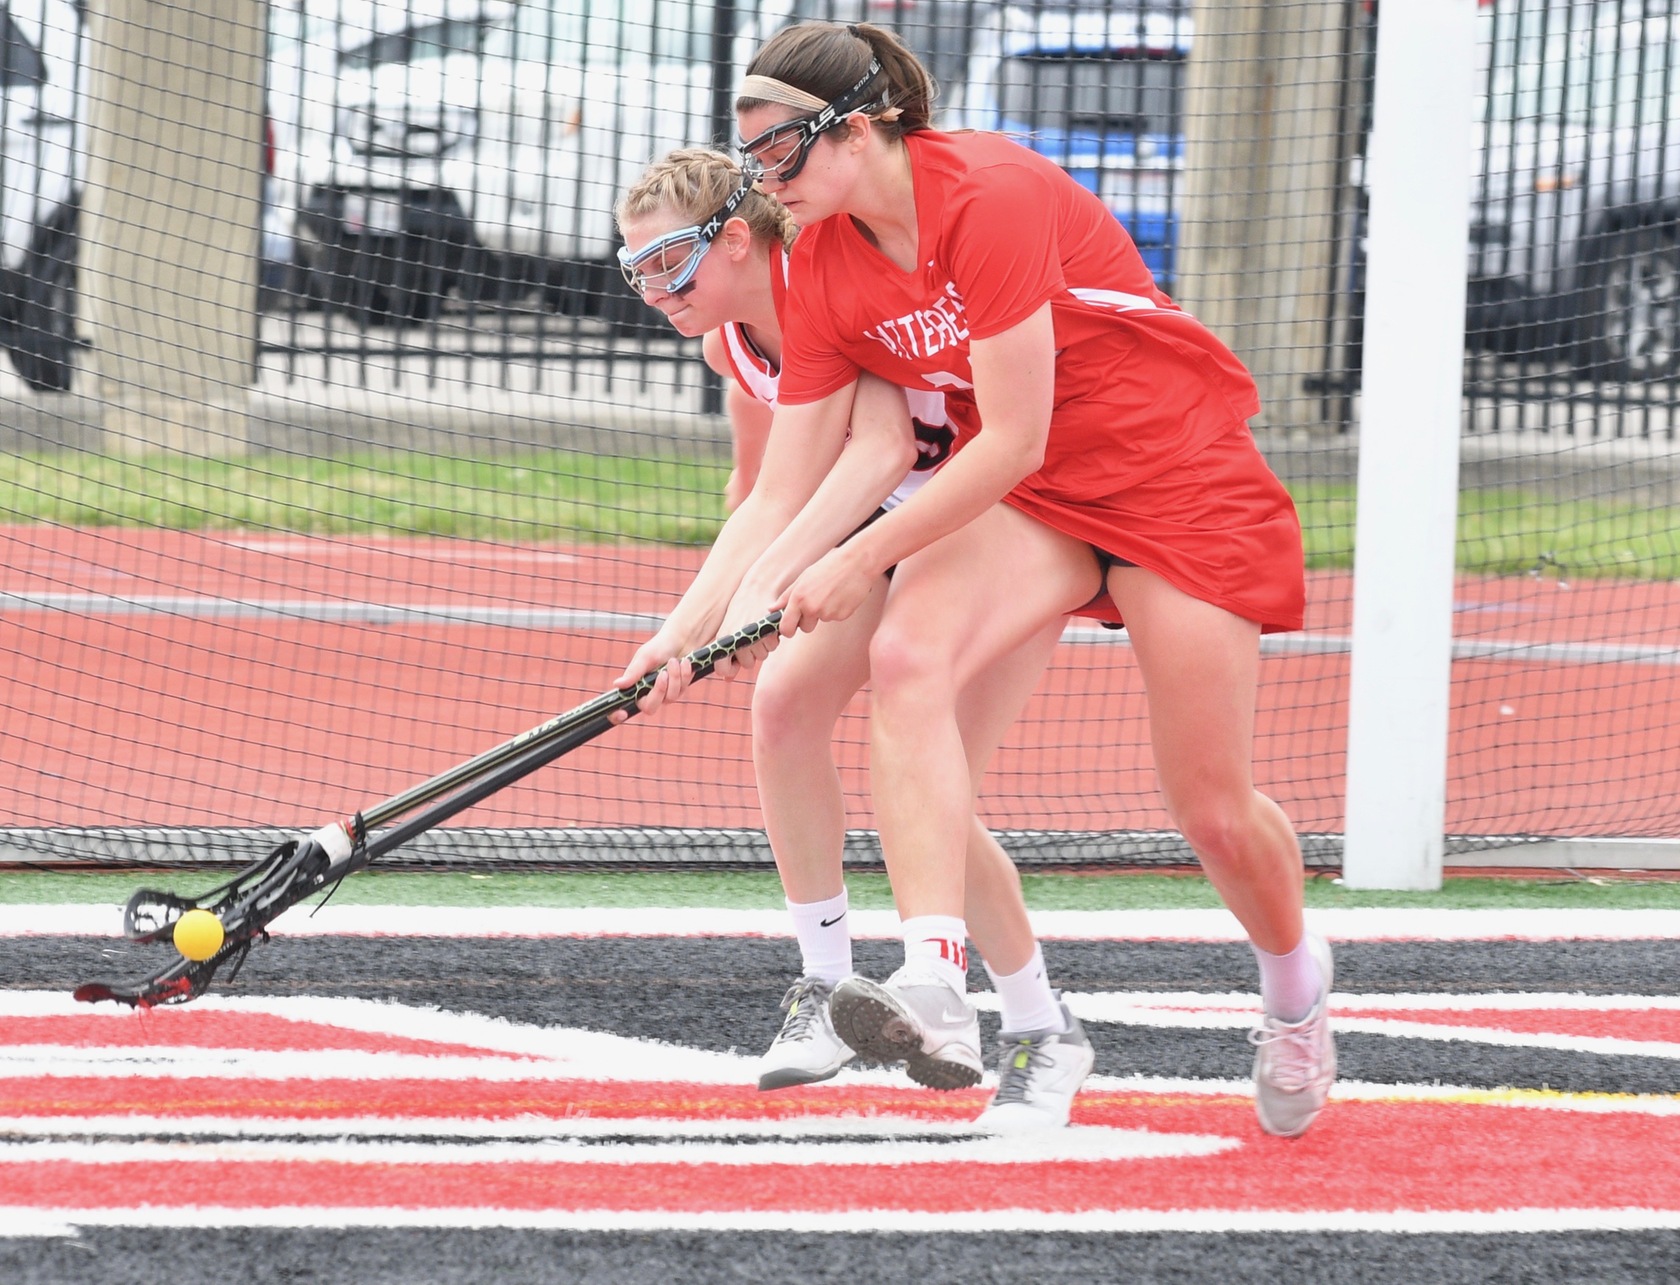 Senior Emily Wadds posted her fifth-straight hat trick performance in the Tigers' 25-6 loss at Denison